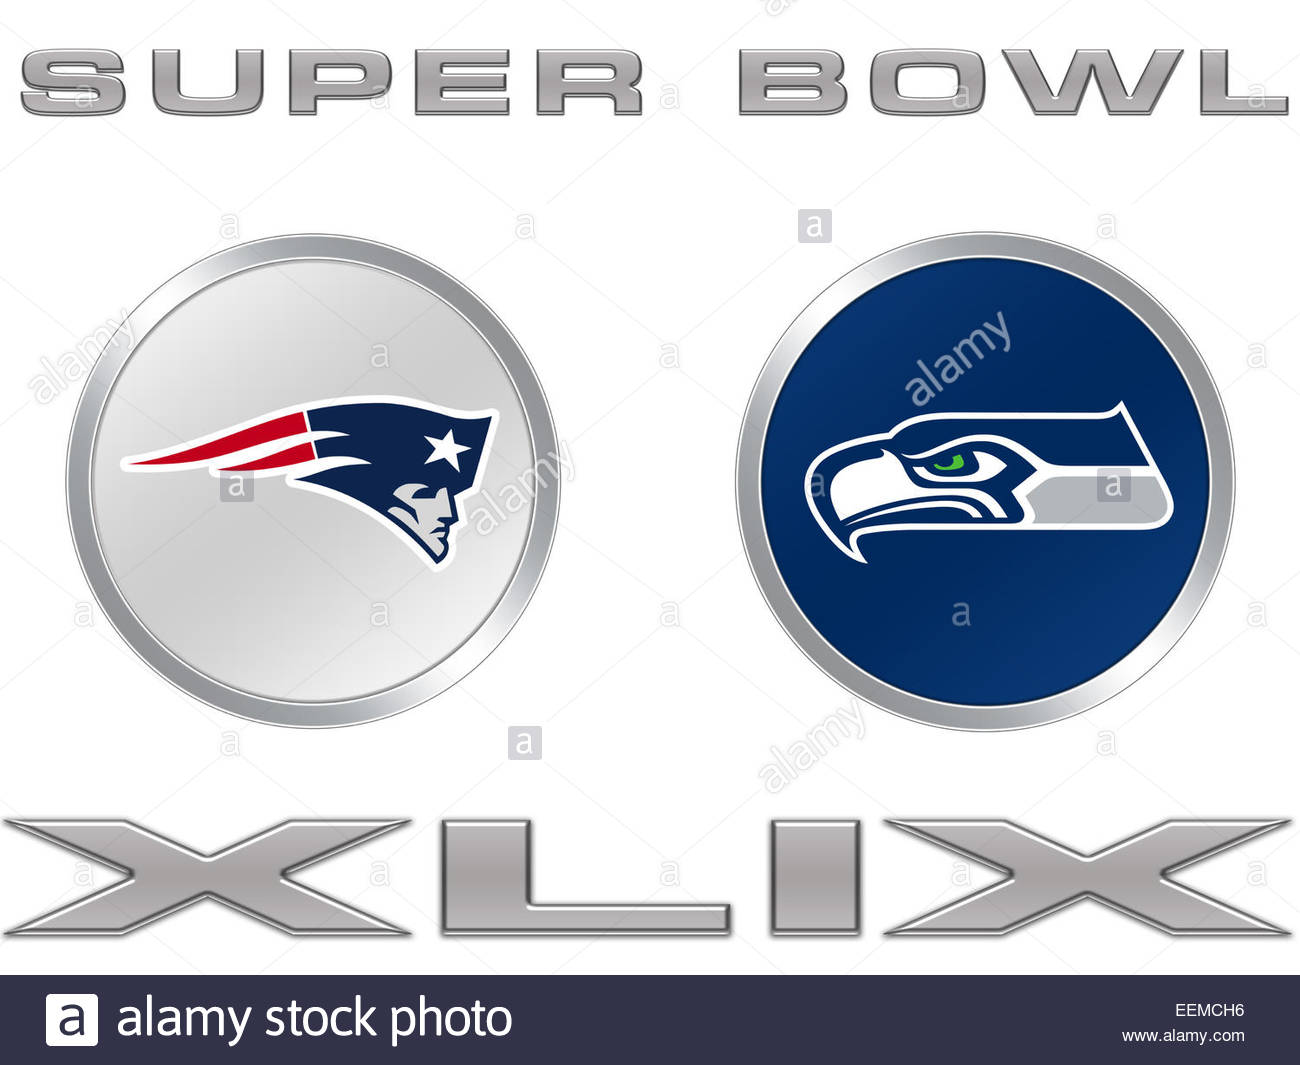 Seattle seahawks Icons - Download 4 Free Seattle seahawks icons here